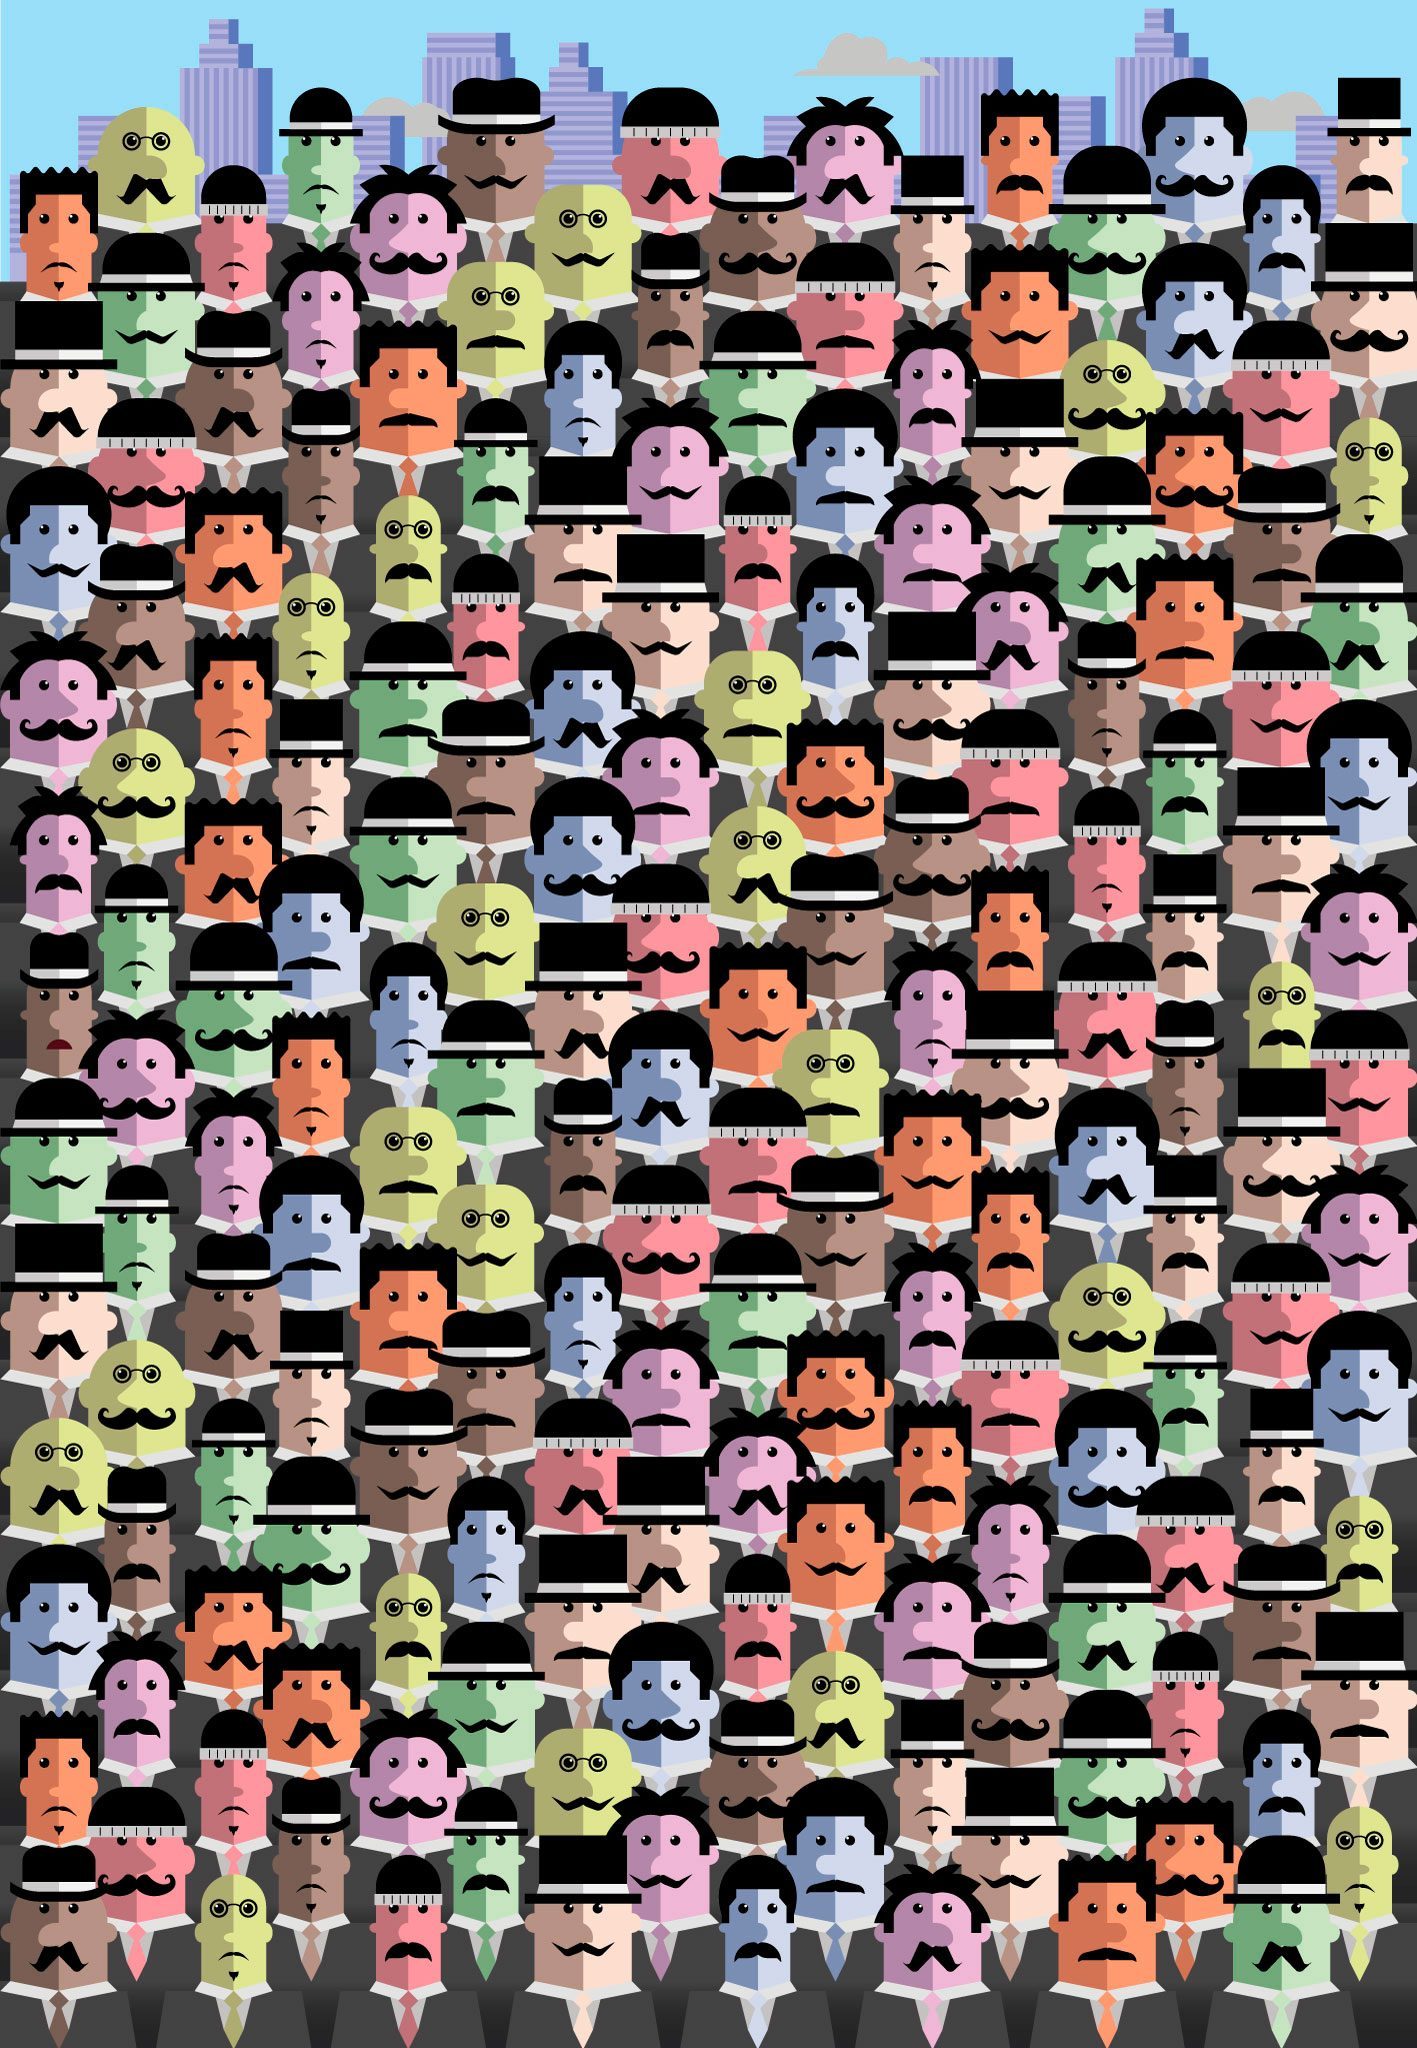 illustration; find the man without a mustache